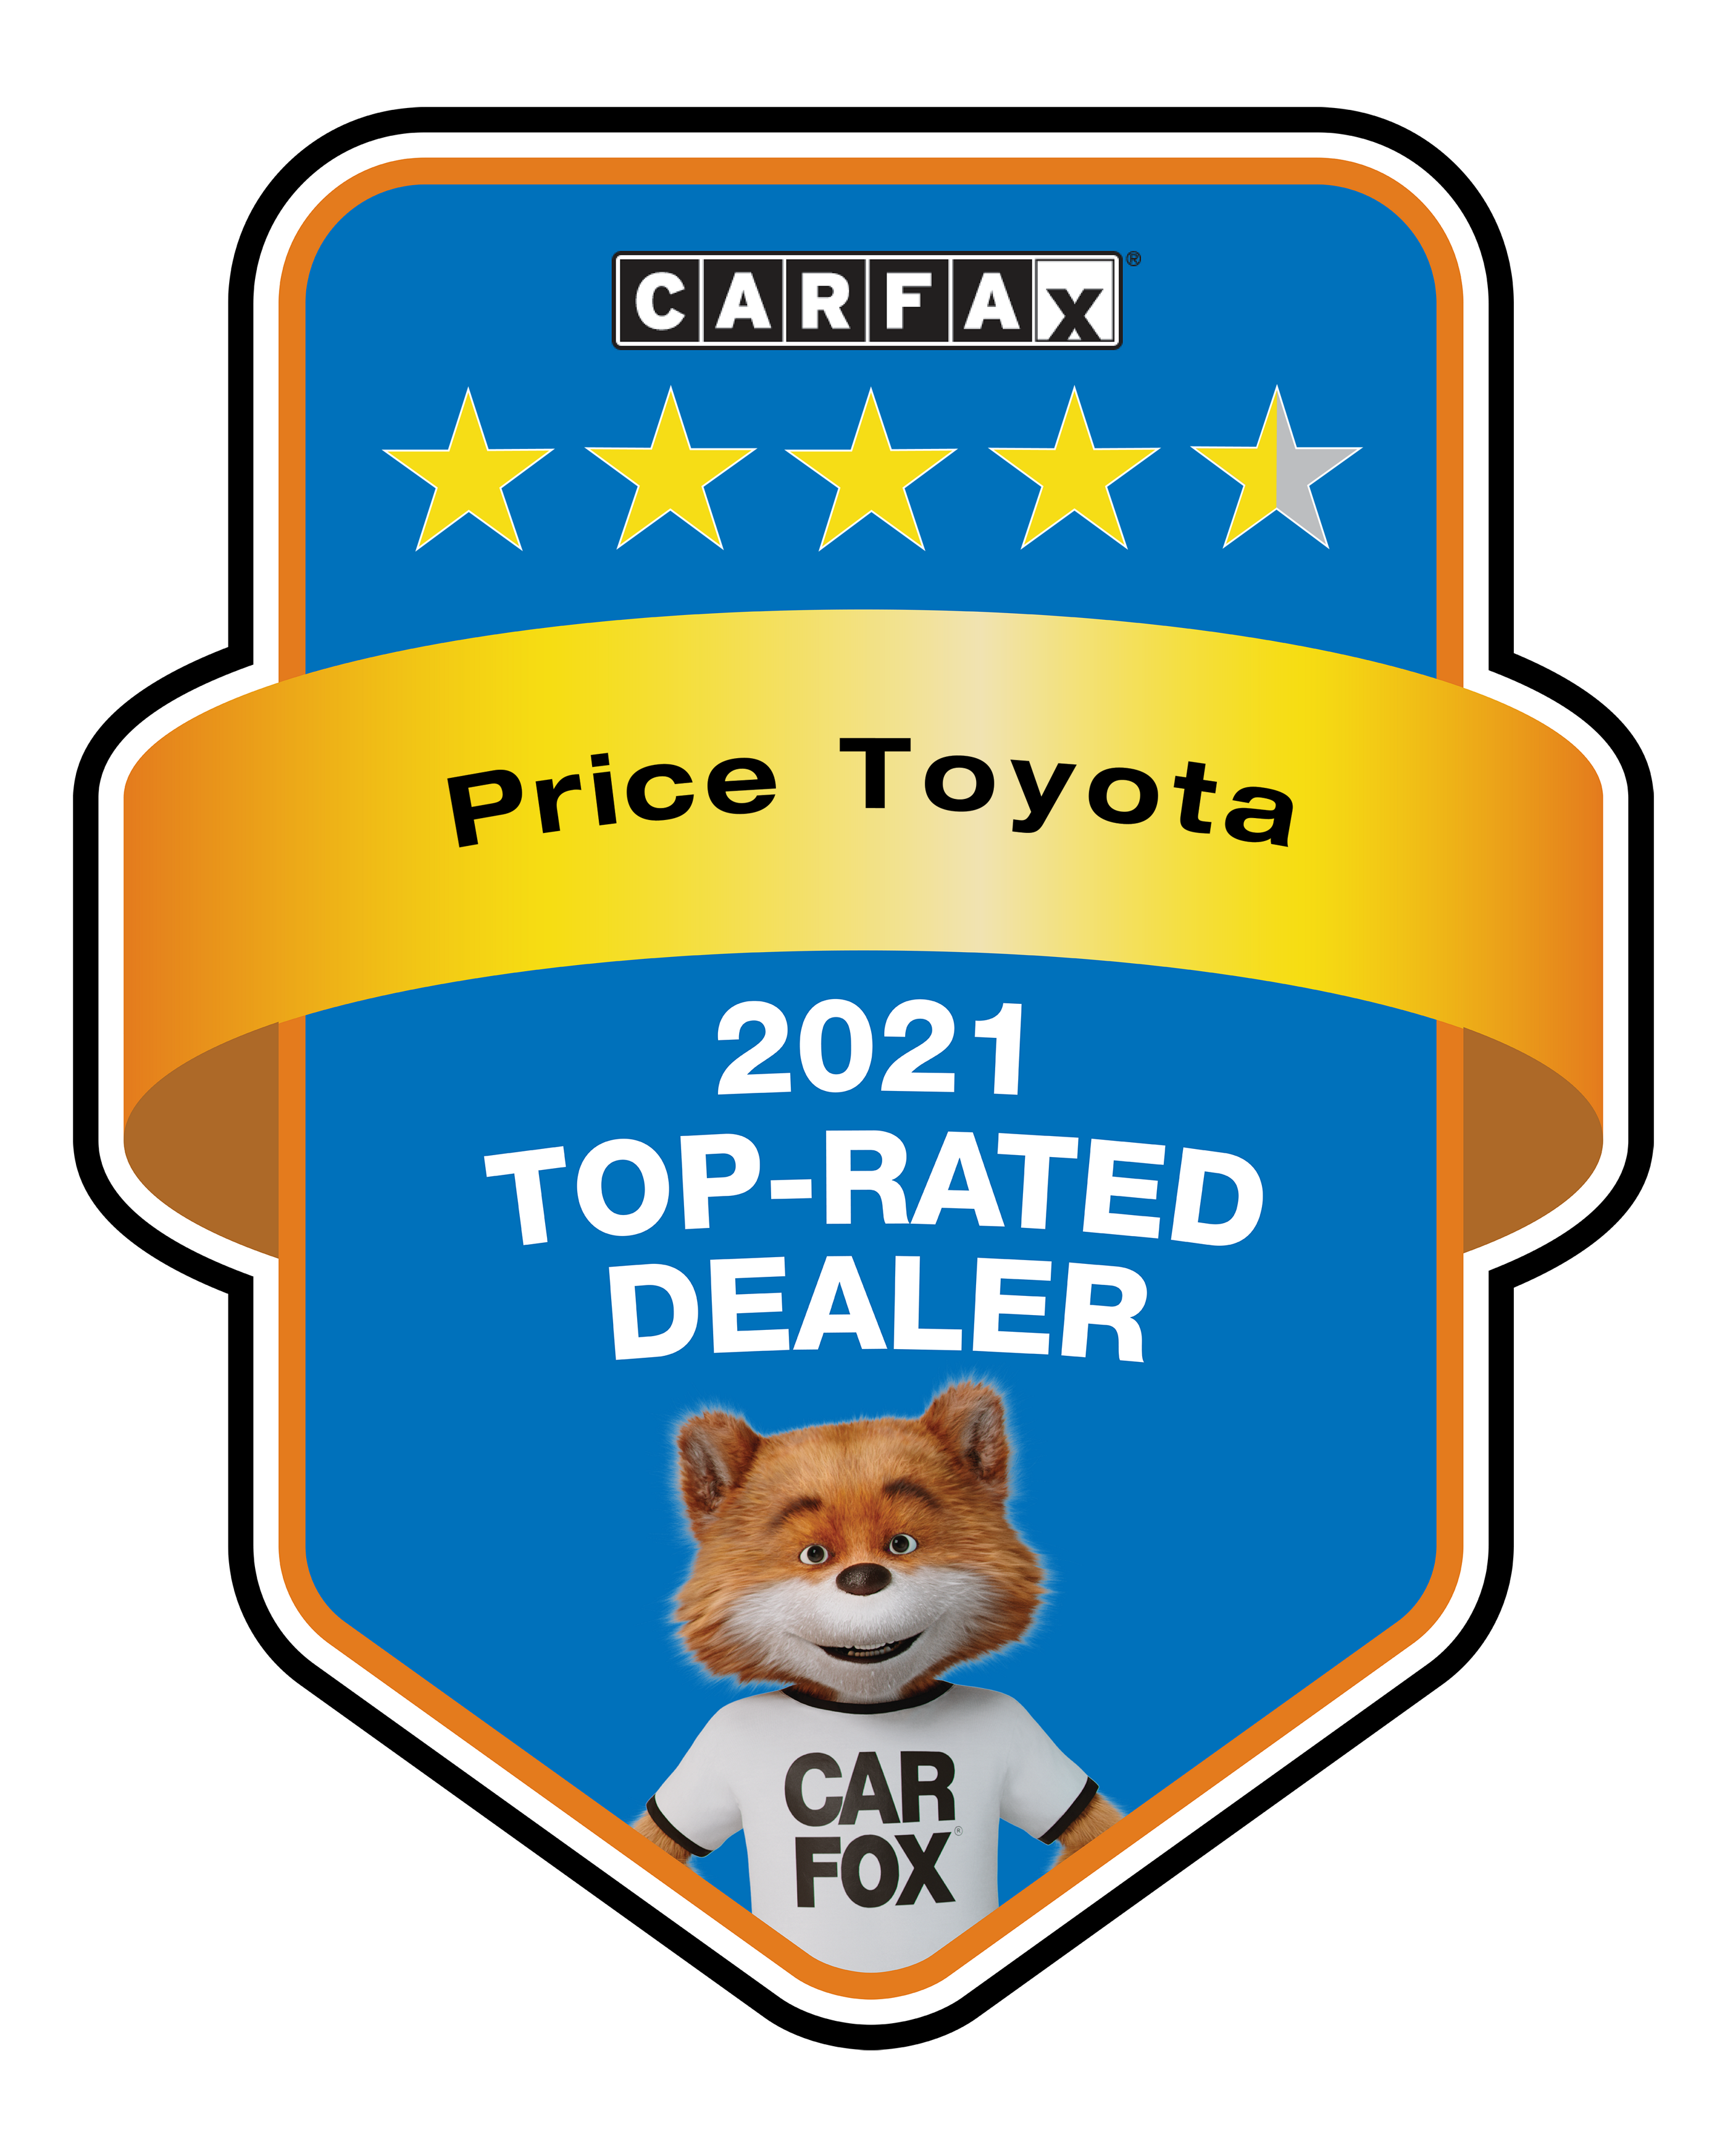 2021 Carfax Award for Used Cars and Service near Delaware, at Price Toyota